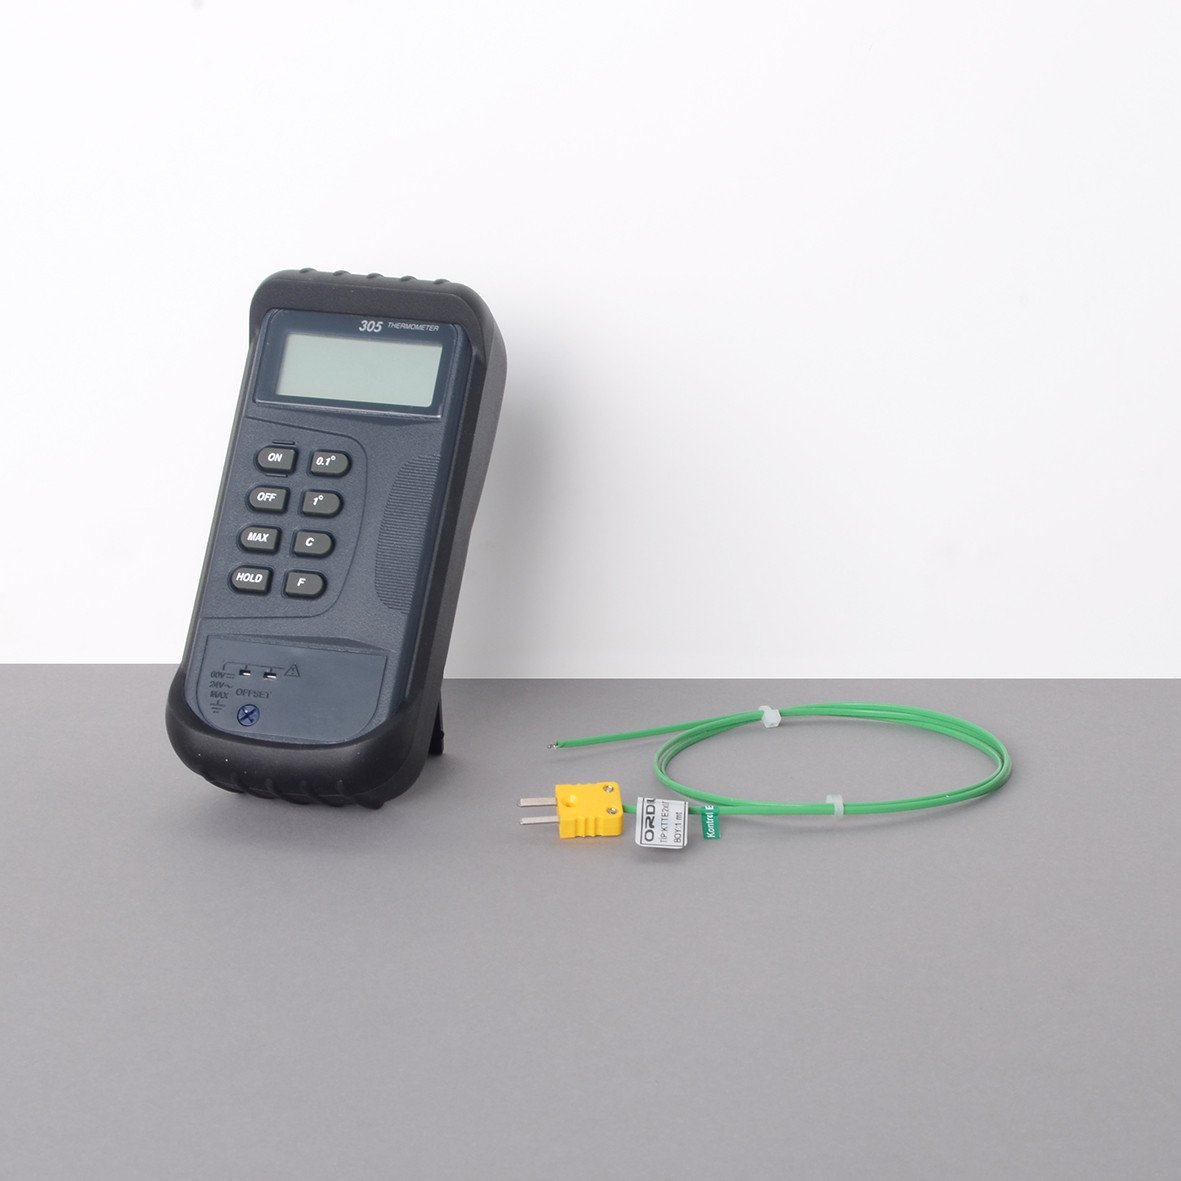 Recording Thermometers - Maturity Meters And Thermometers - CONCRETE  TESTING EQUIPMENT FOR THE FIELD AND LAB